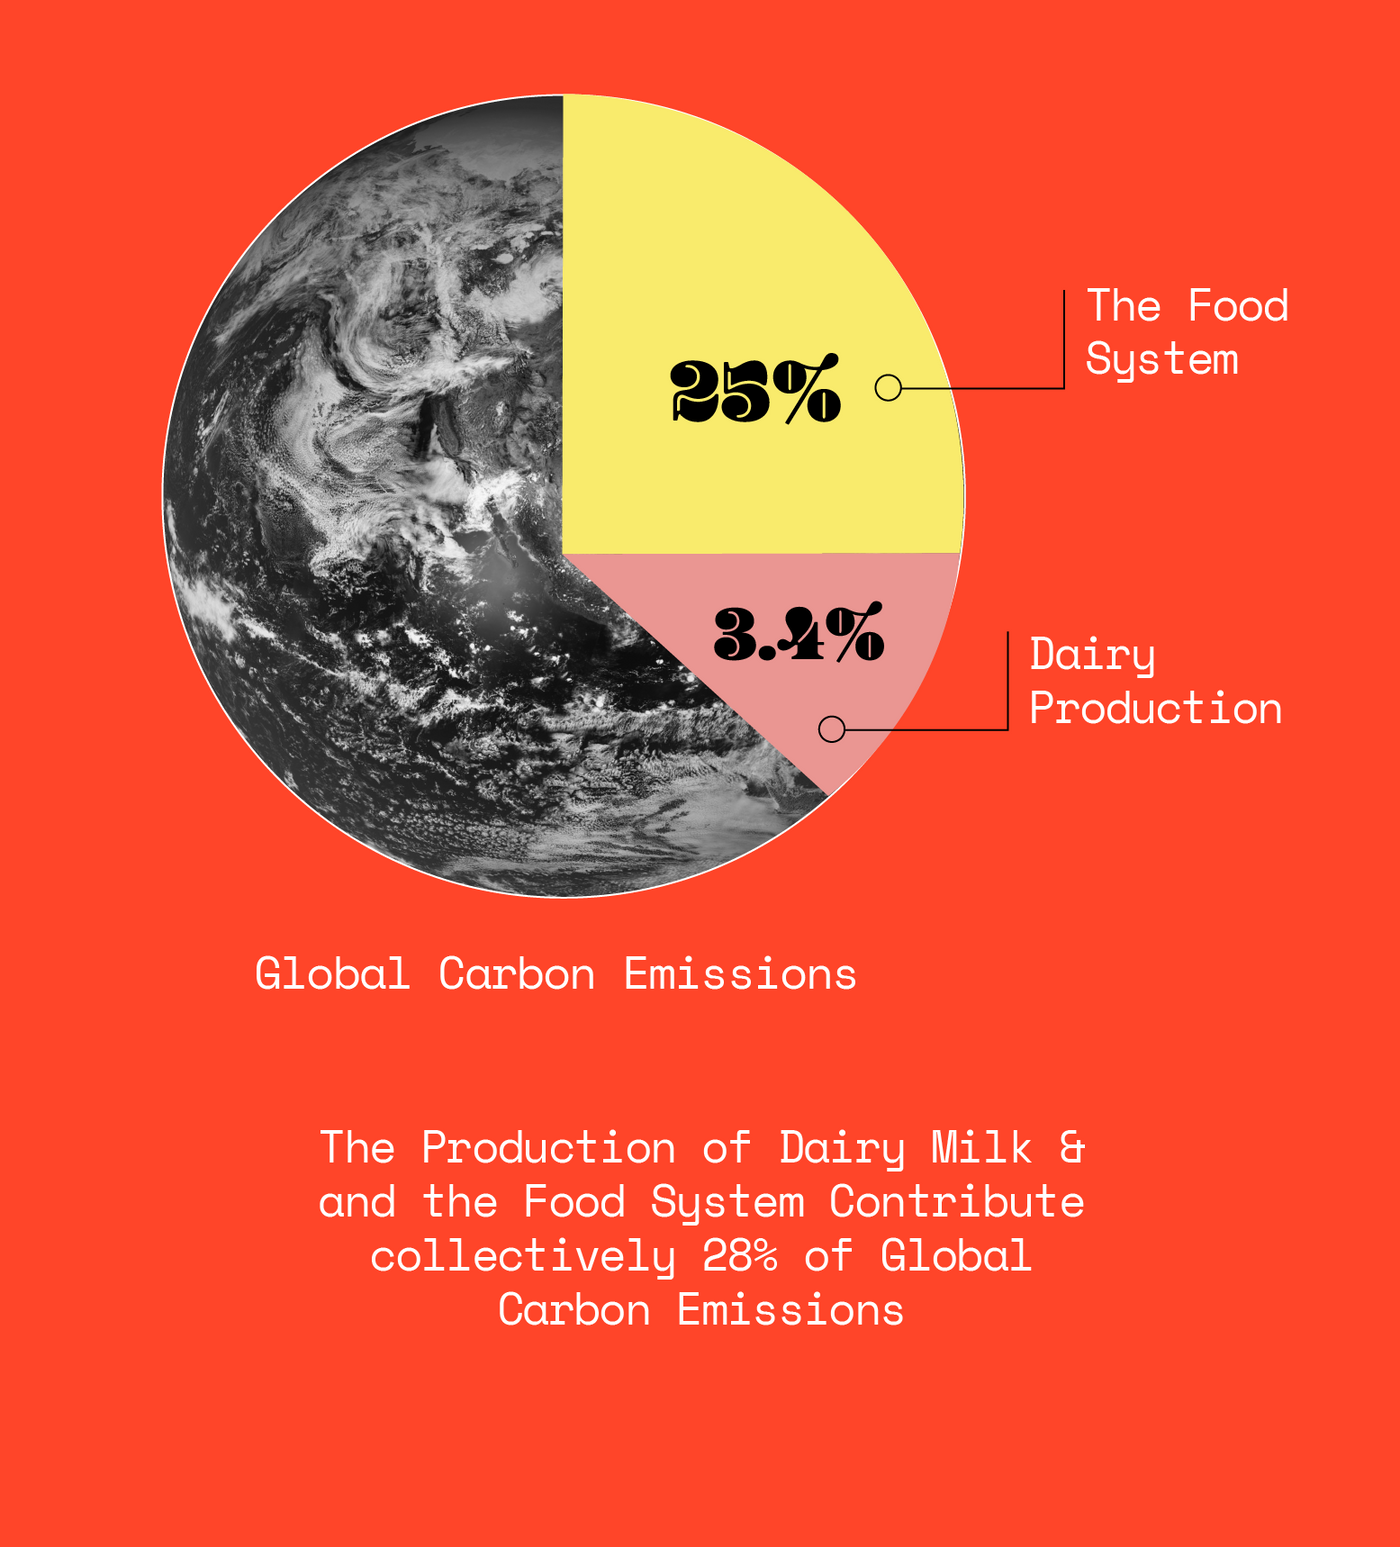 Pie Chart Showing Global Carbon Emissions. The production of Dairy Milk & the Food System contribute 28% of Global Carbon Emissions